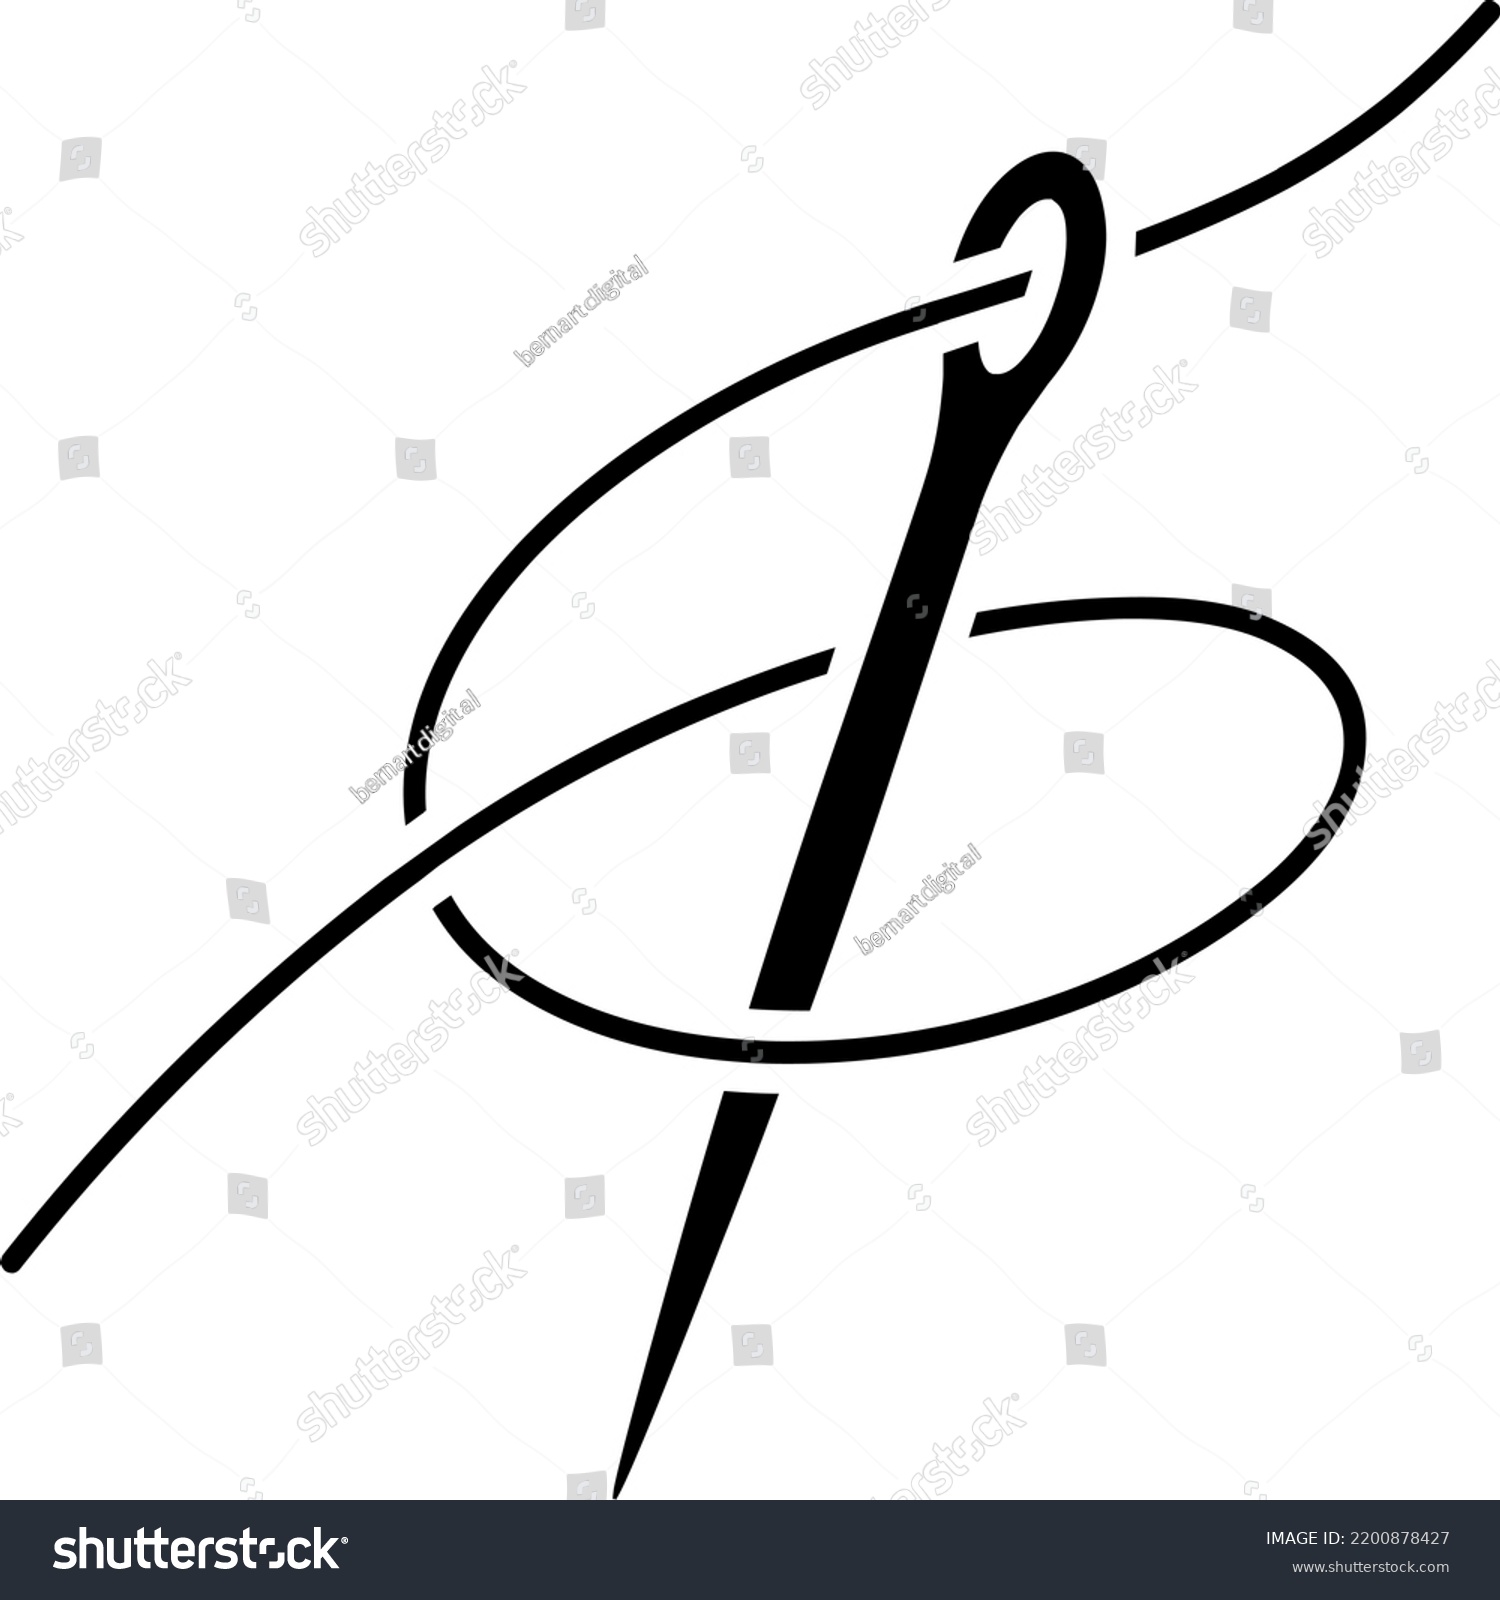 Needle Thread Black White Drawing Vector Stock Vector (Royalty Free ...